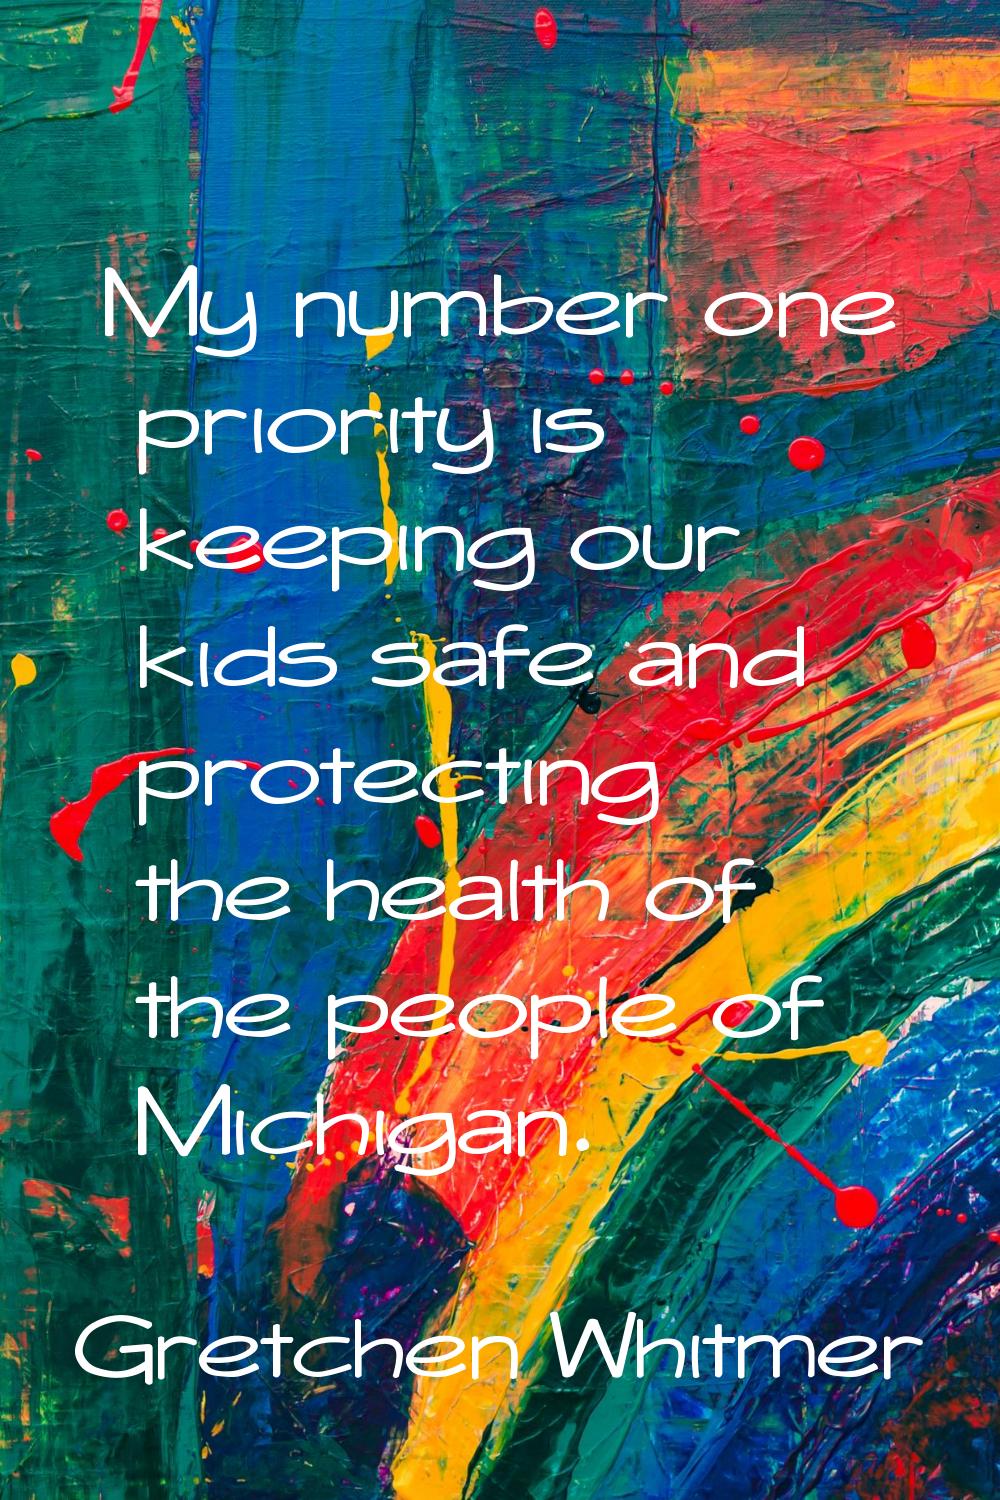 My number one priority is keeping our kids safe and protecting the health of the people of Michigan